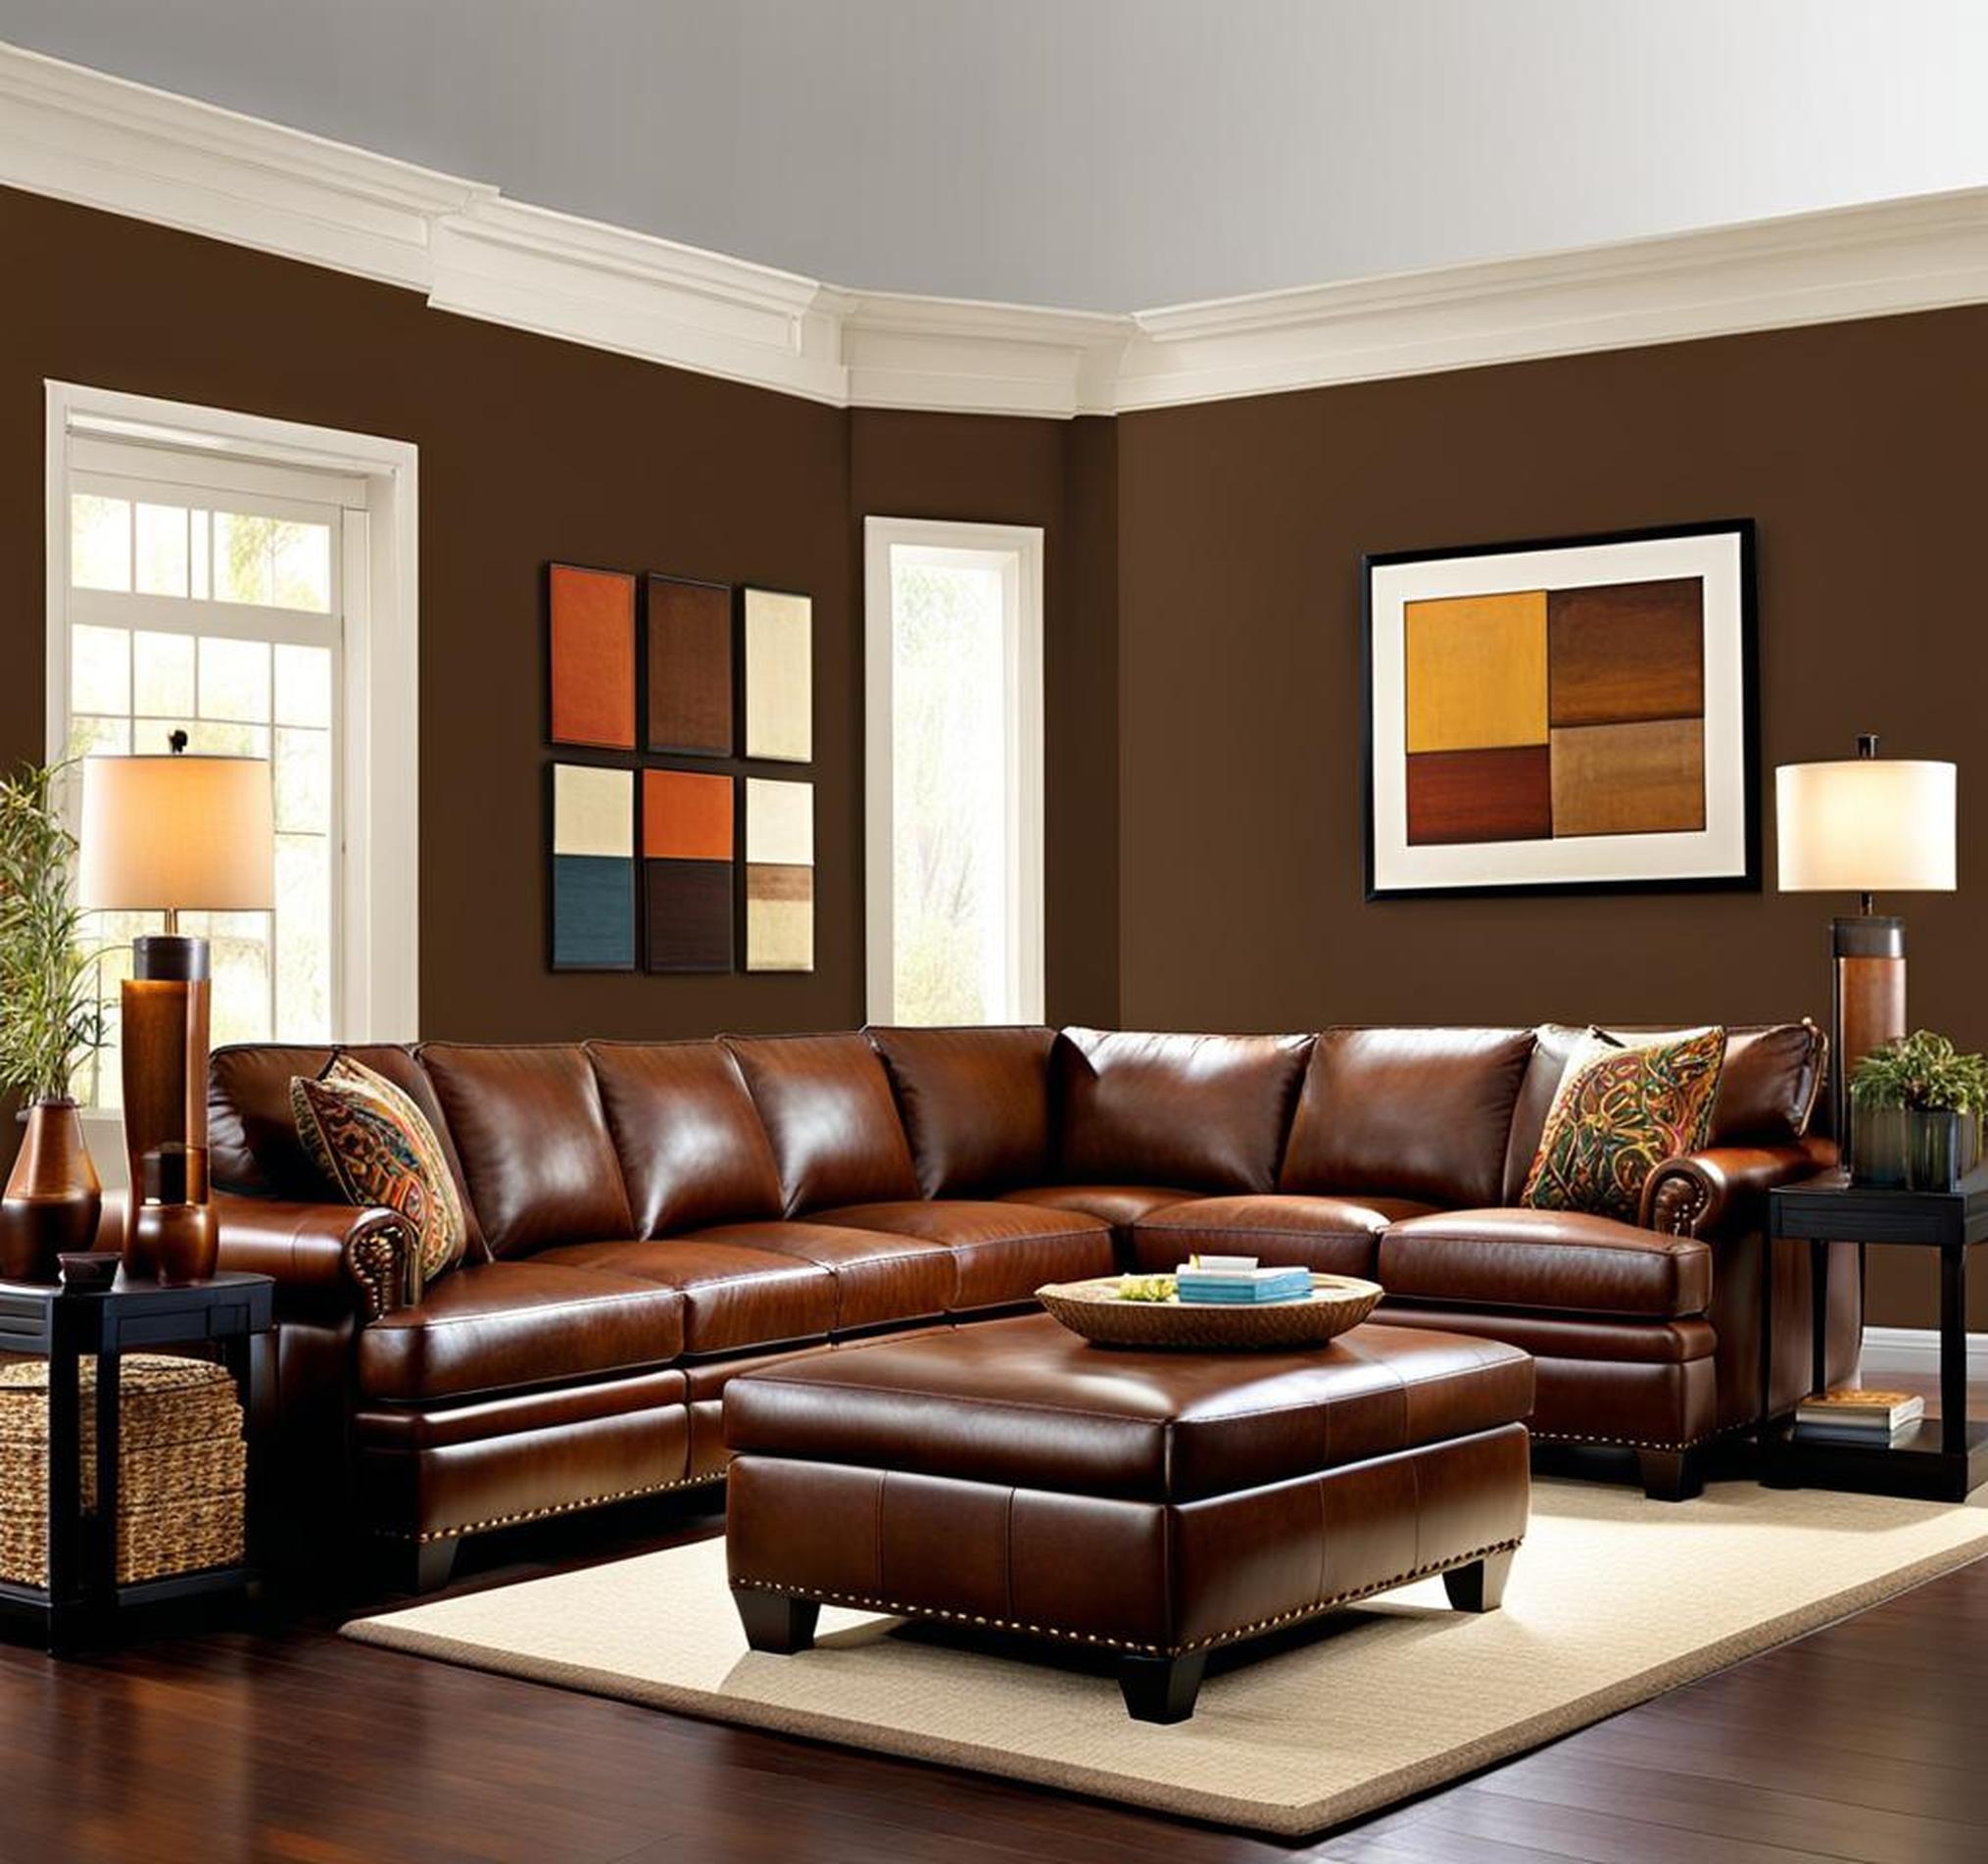 living room color schemes with brown leather furniture